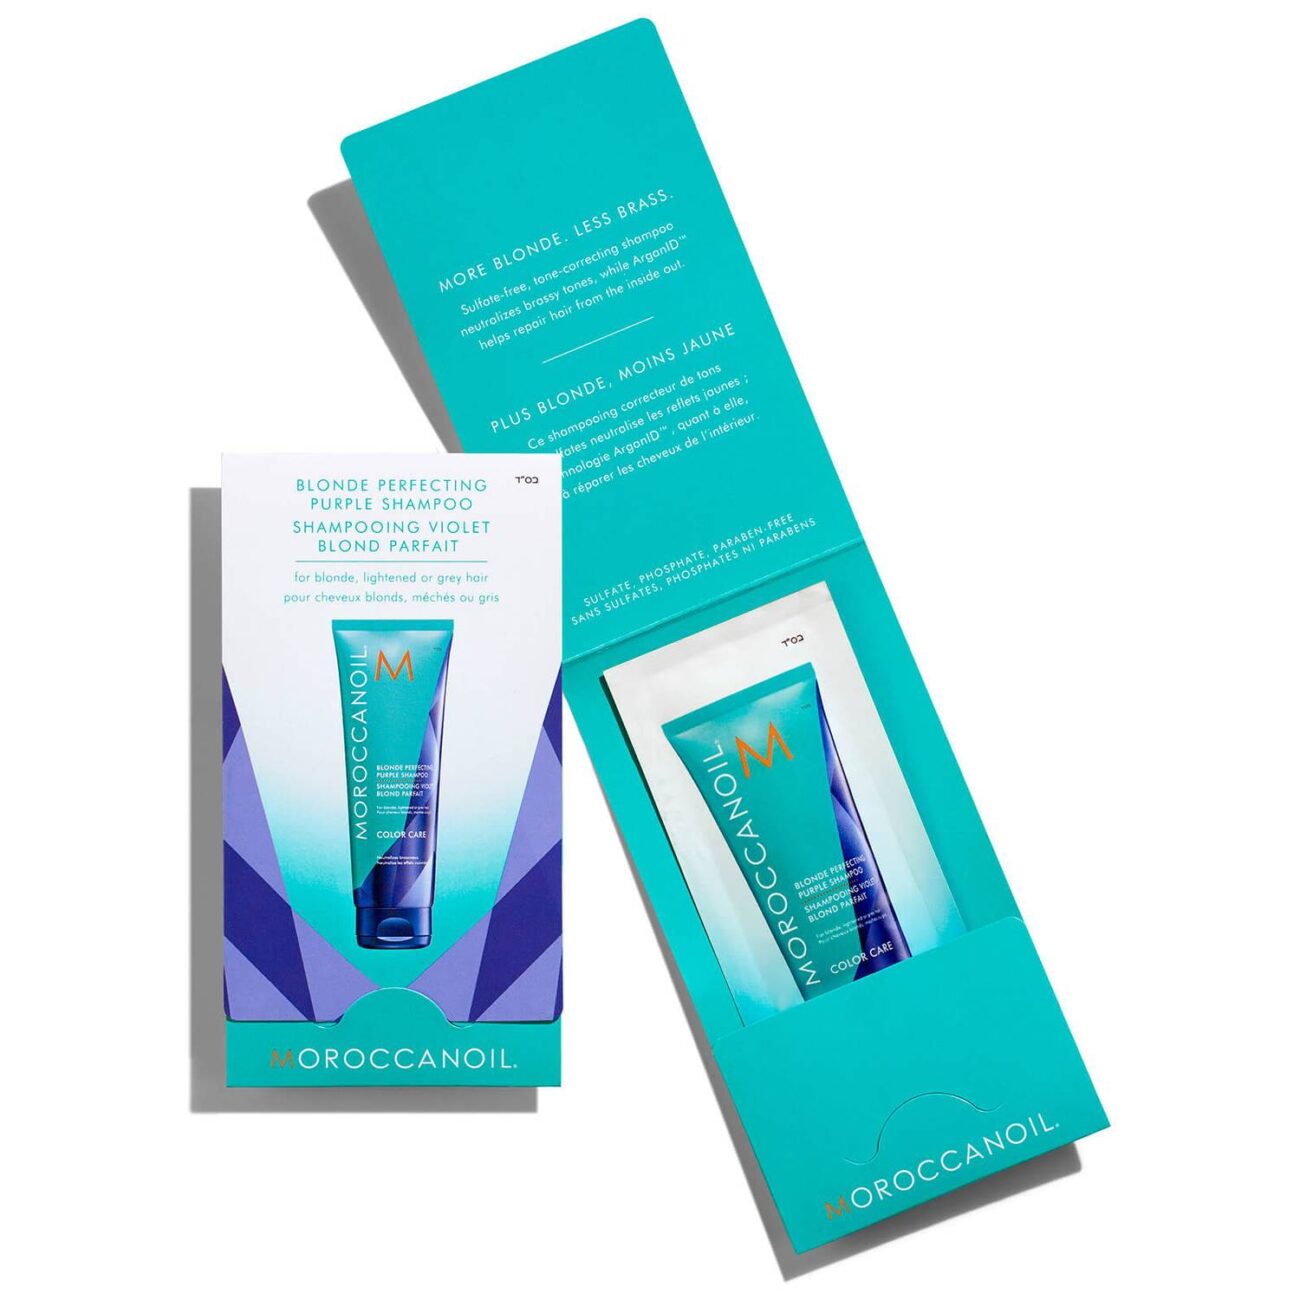 Blonde Perfecting Purple Shampoo Packette-Moroccanoil